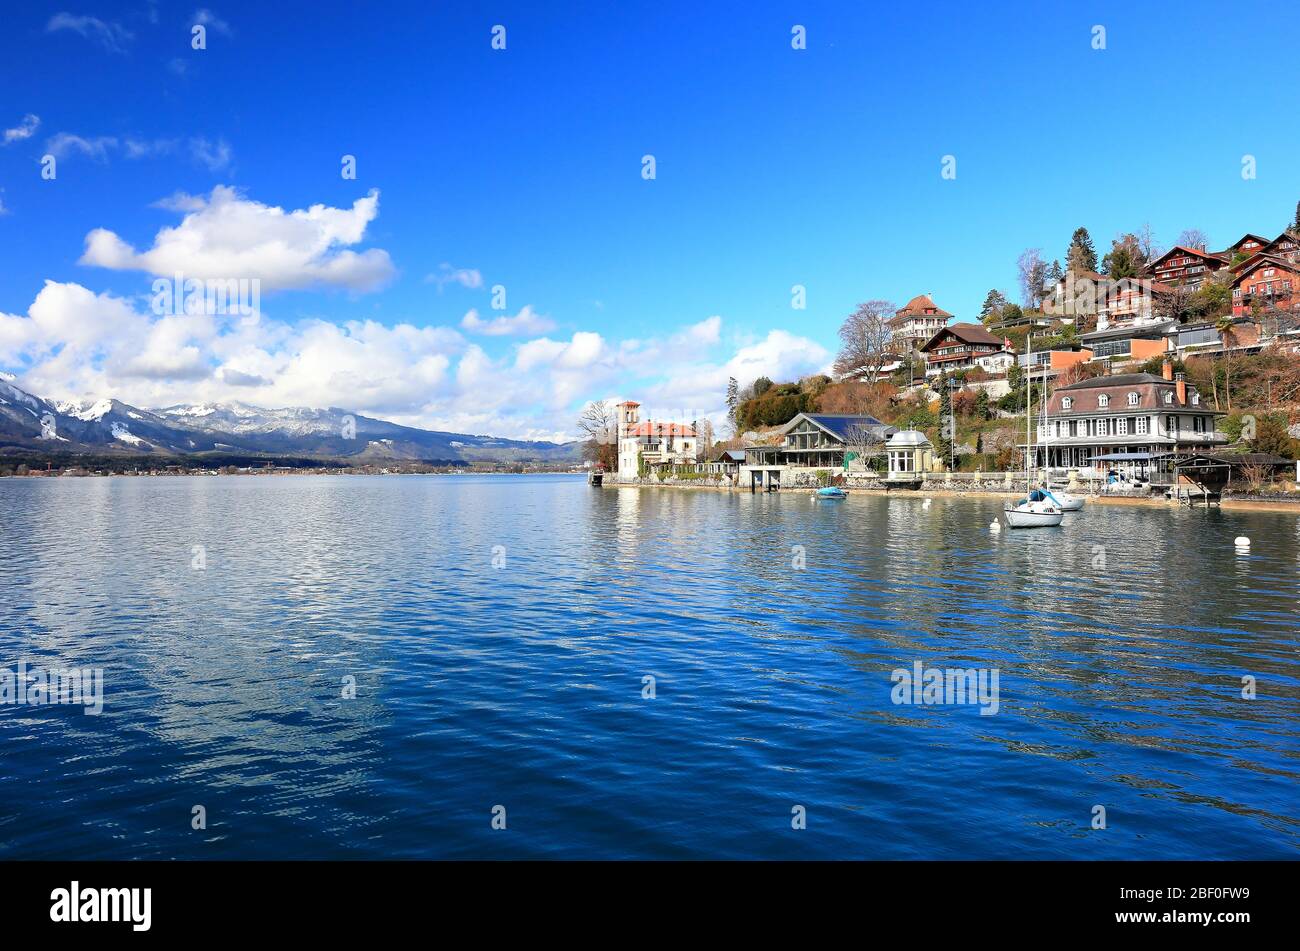 Oberhofen am Thunersee. The town is located on the northern shore of Lake Thun. Switzerland, Europe. Stock Photo